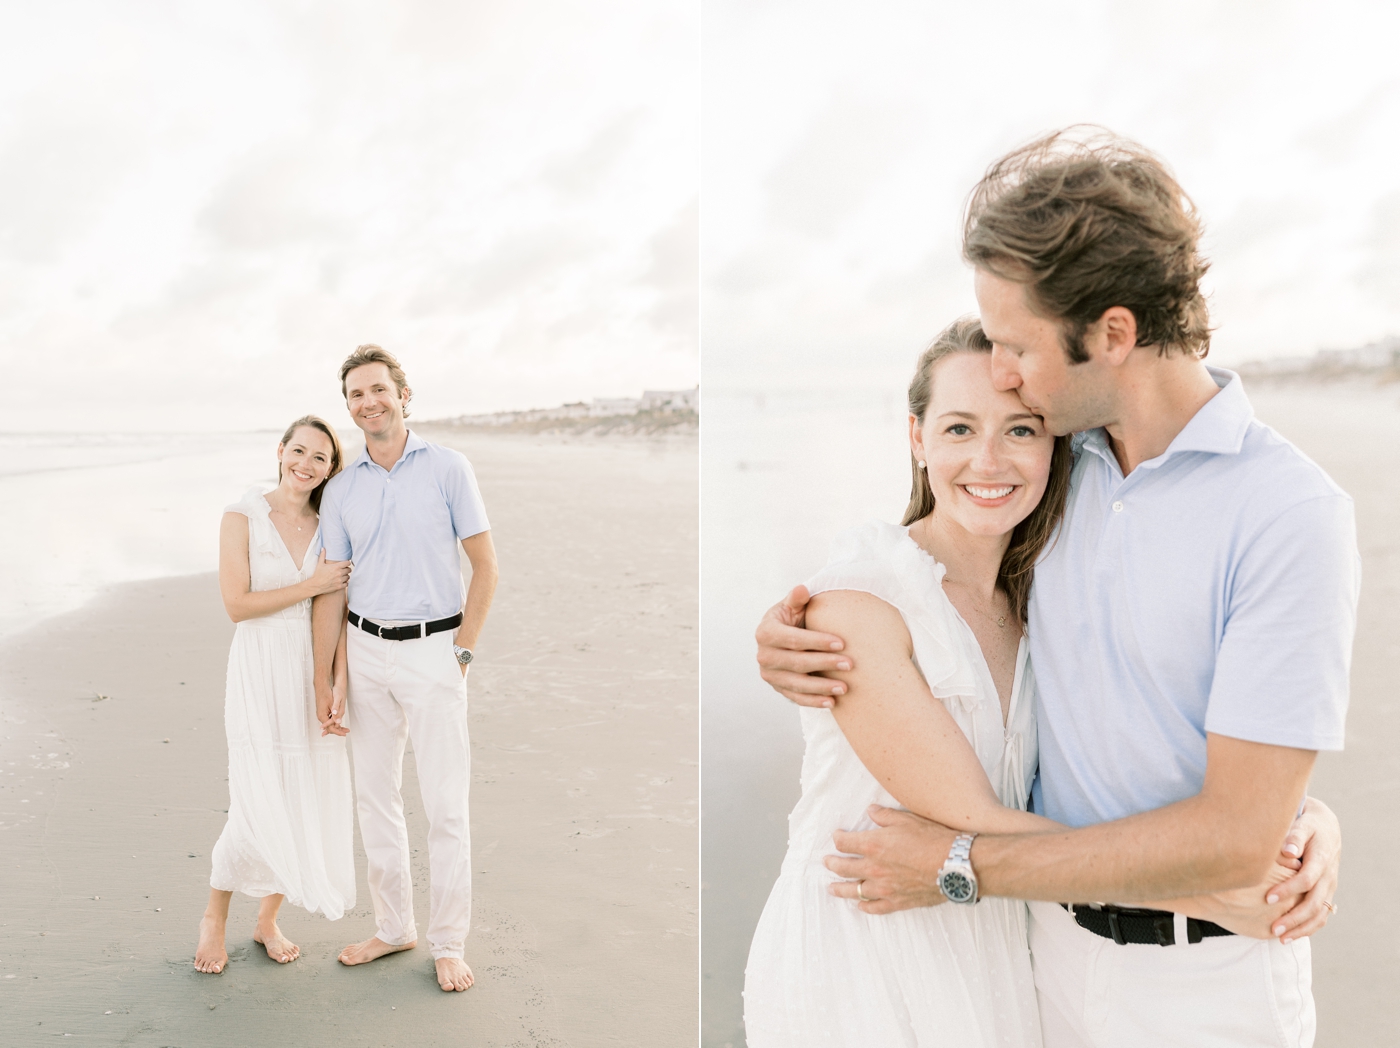 Couple during their Isle of Palms Family Session | Photo by Caitlyn Motycka Photography.